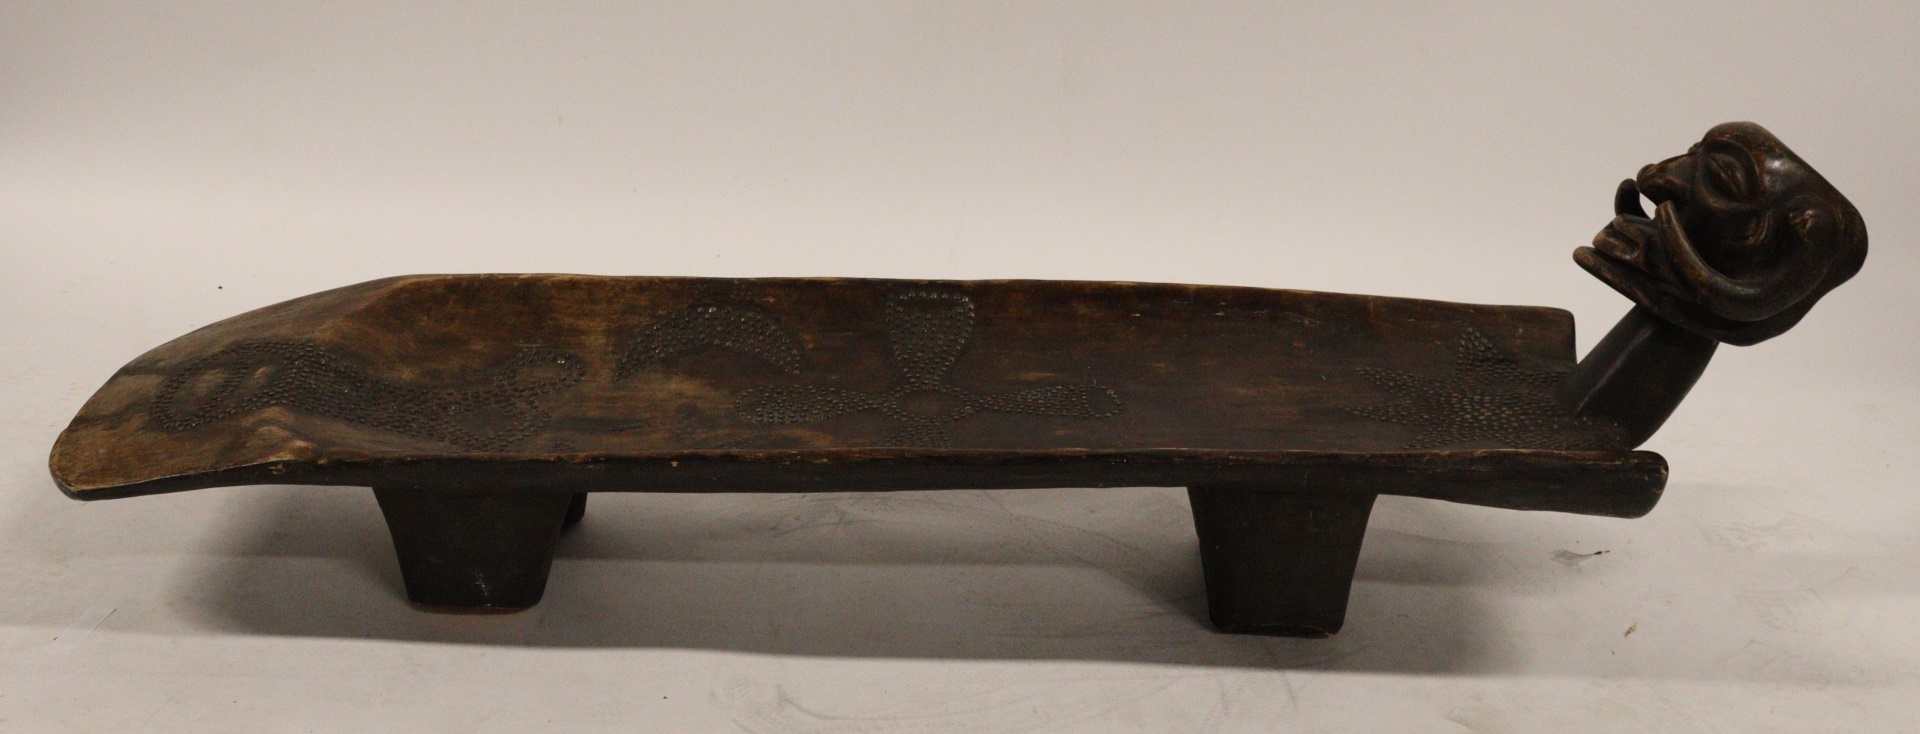 A CARVED AFRICAN CEREMONIAL BED  3b778f